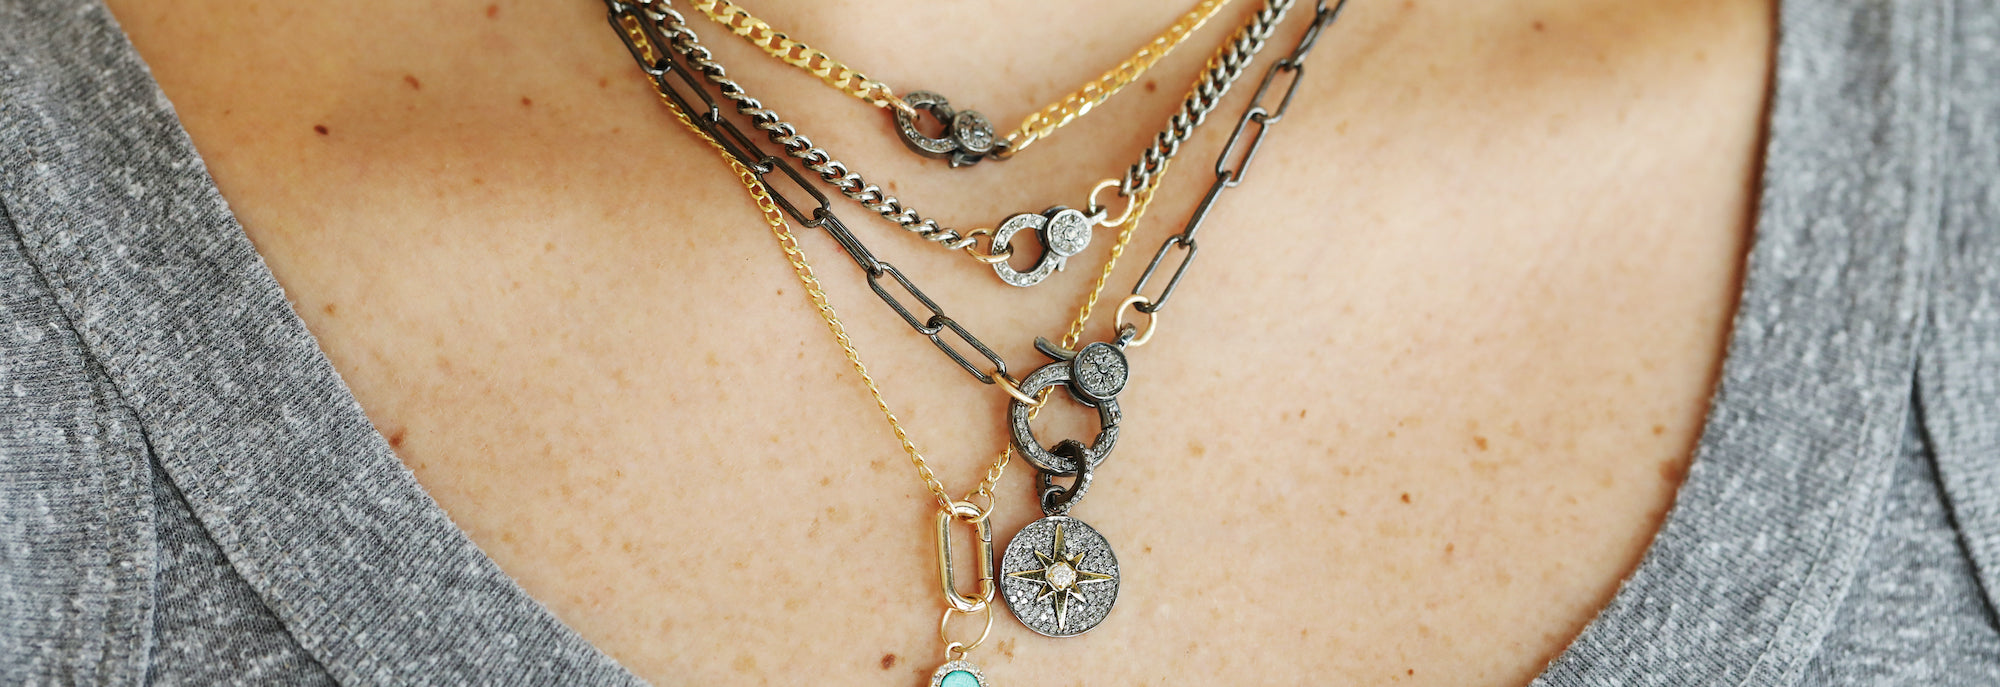 Jewelry staples | Mixed metals jewelry style, Silver gold jewelry mix, Mix  metal necklace